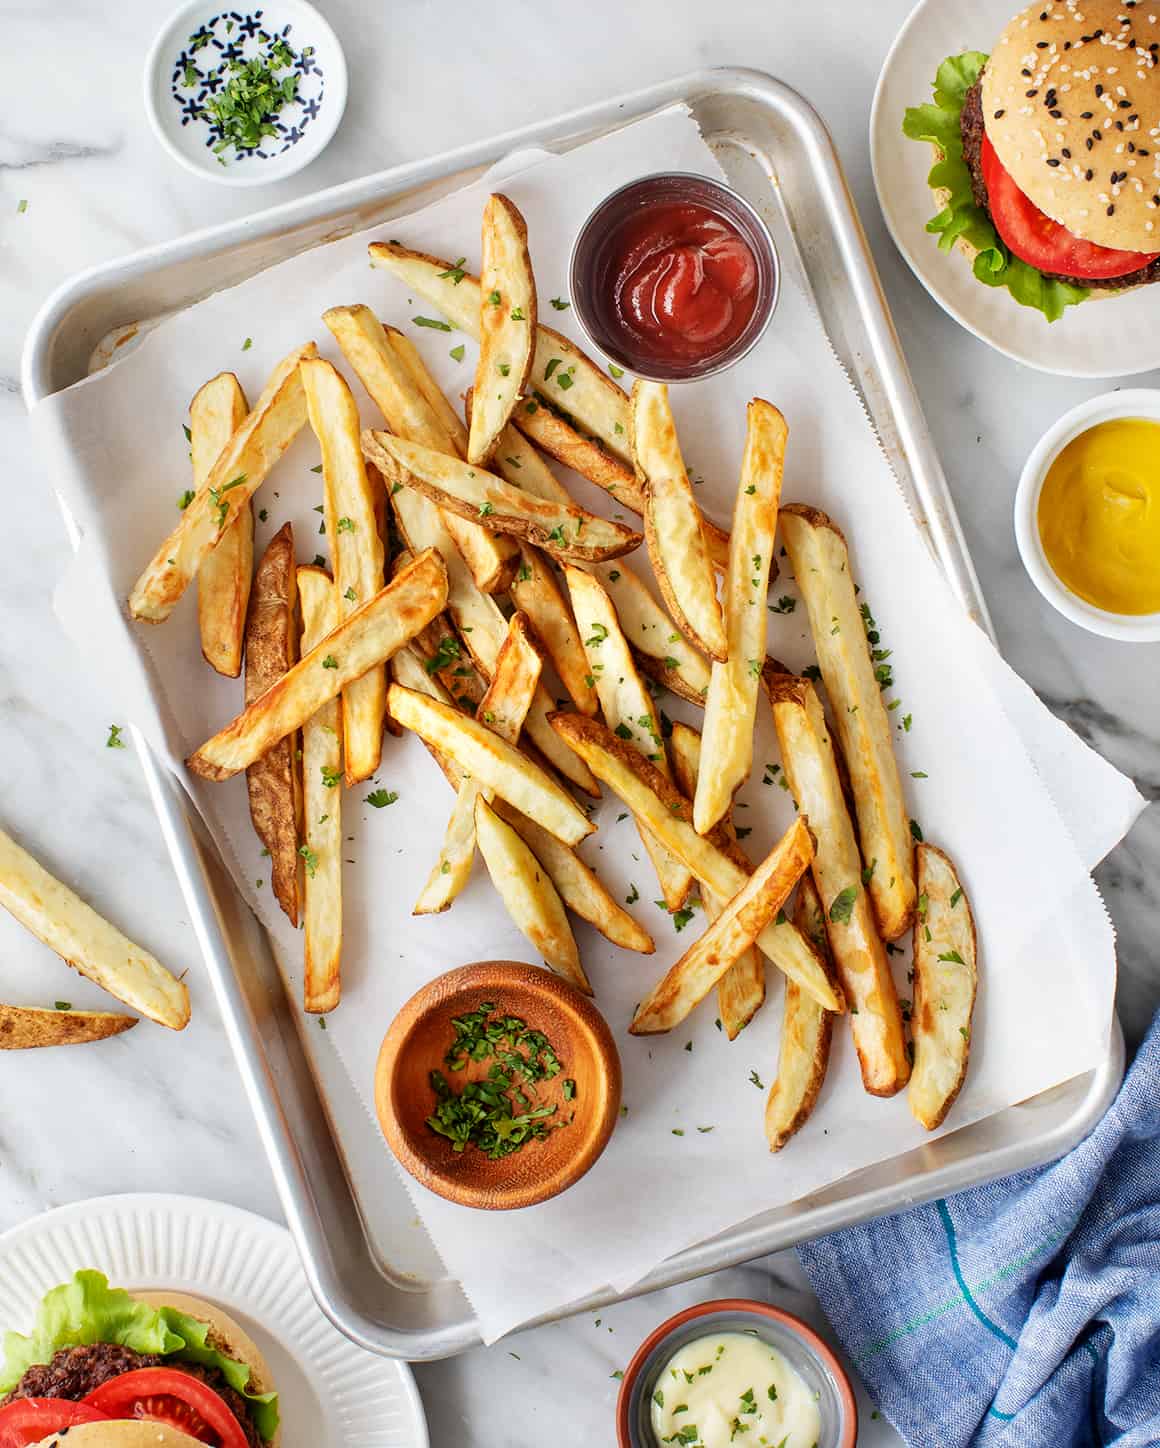  Air fryer French fries